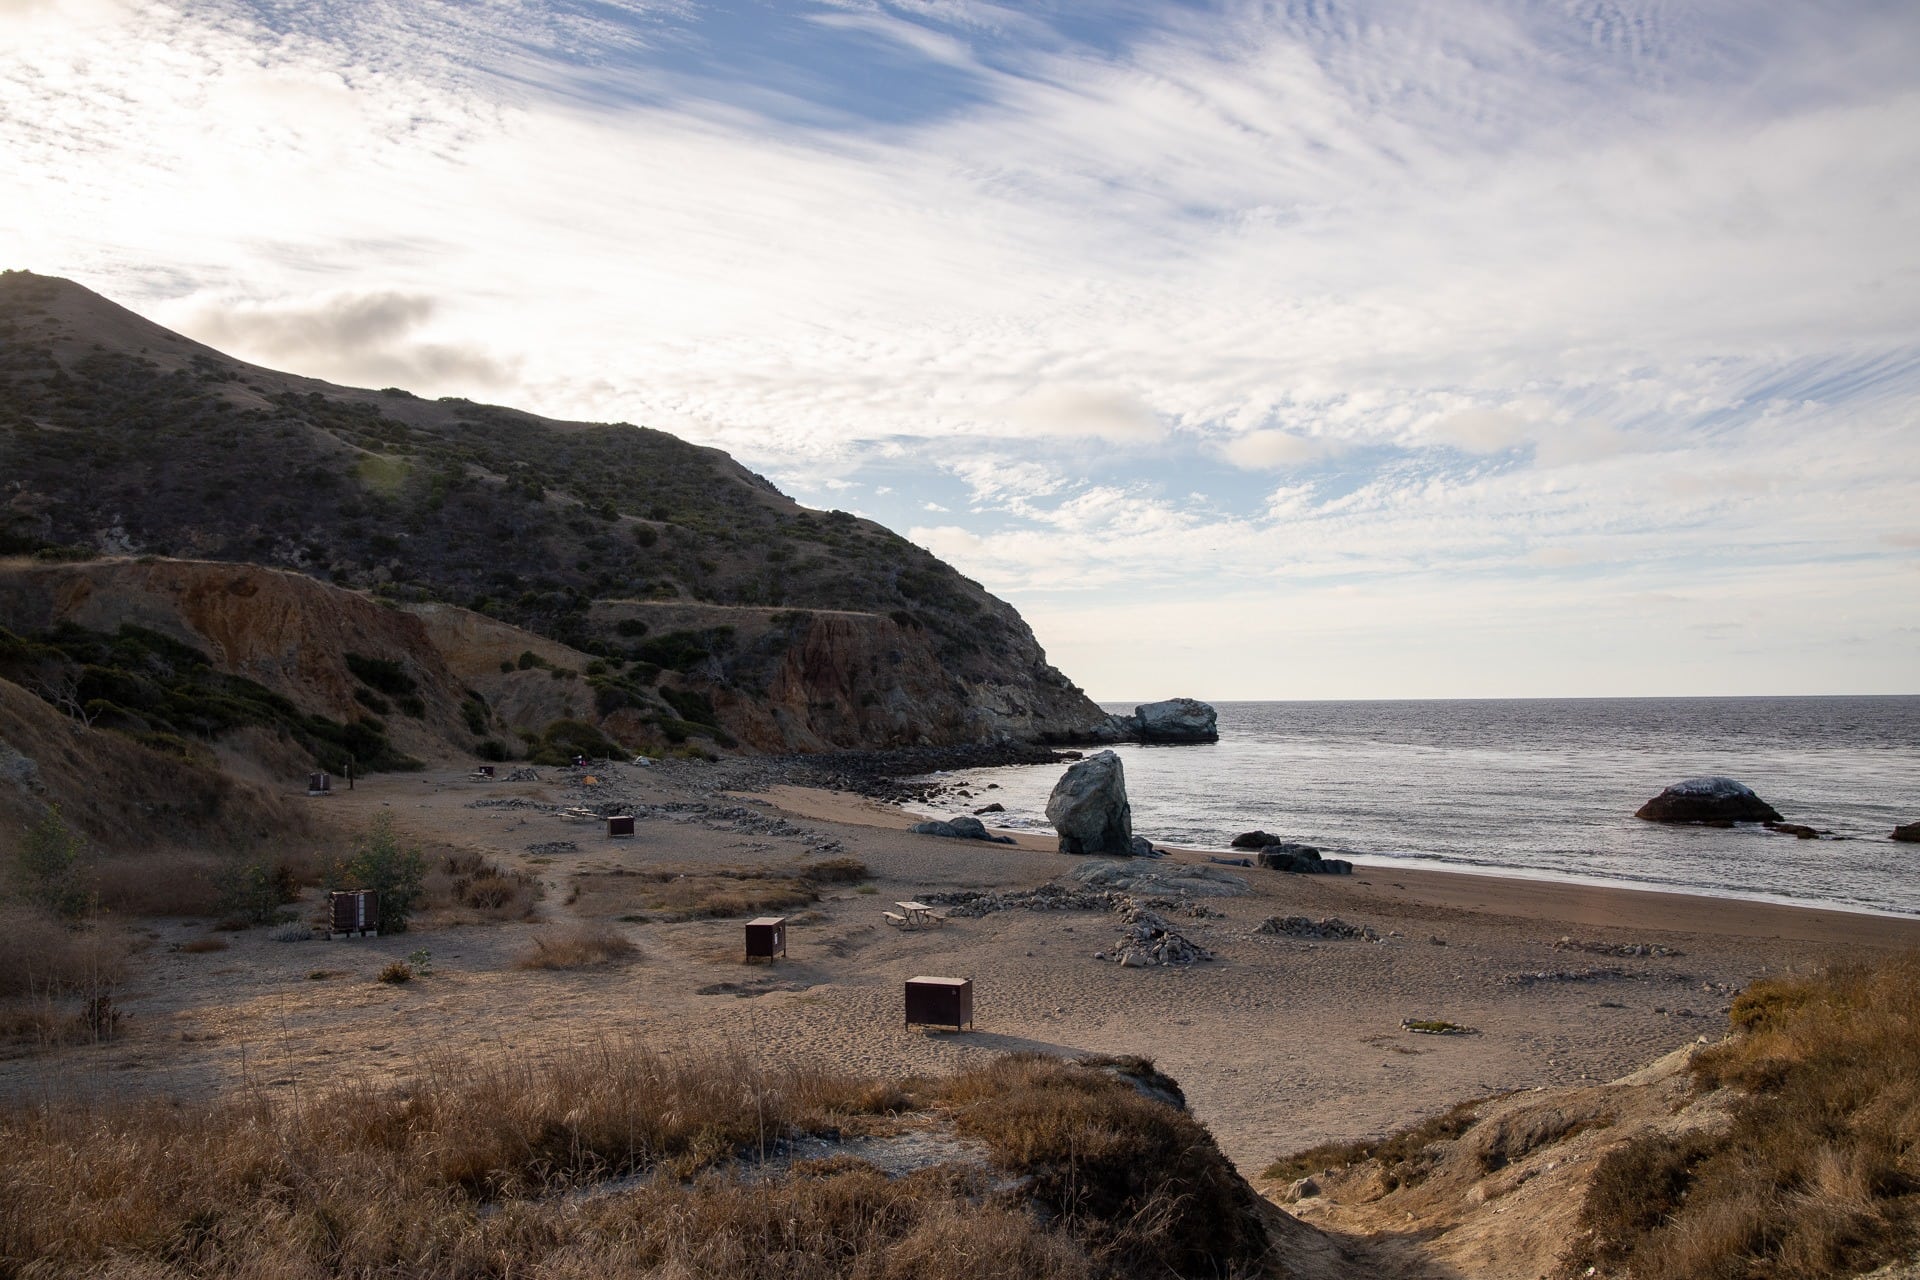 Parson's Landing / Plan a backpacking trip on the Trans-Catalina Trail on Catalina Island with this trail guide with tips on the best campsites, water availability, gear & more